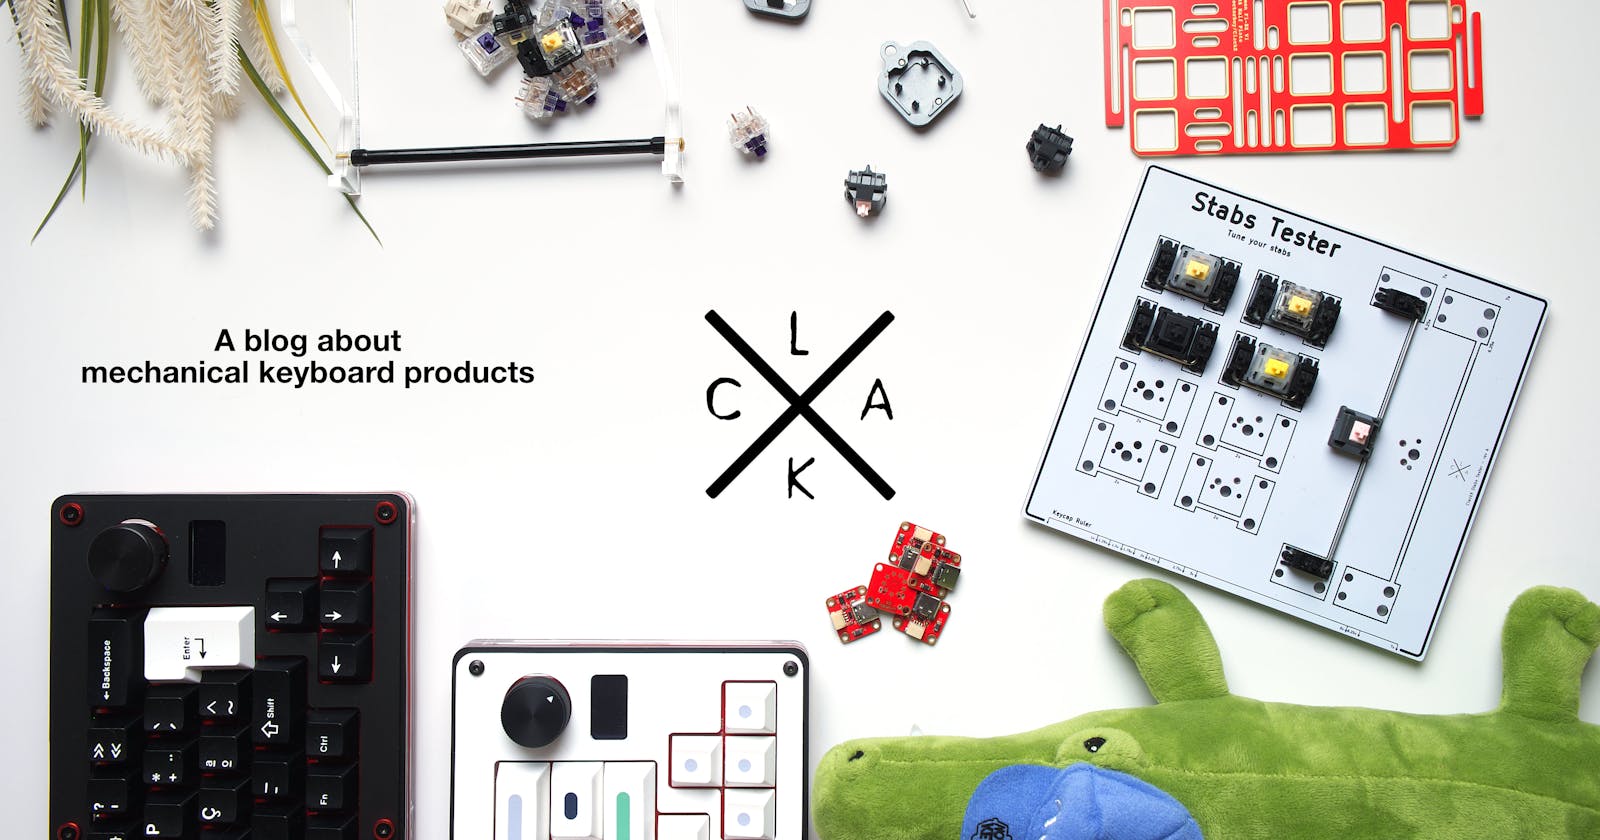 What is ClackX, and who is behind it?